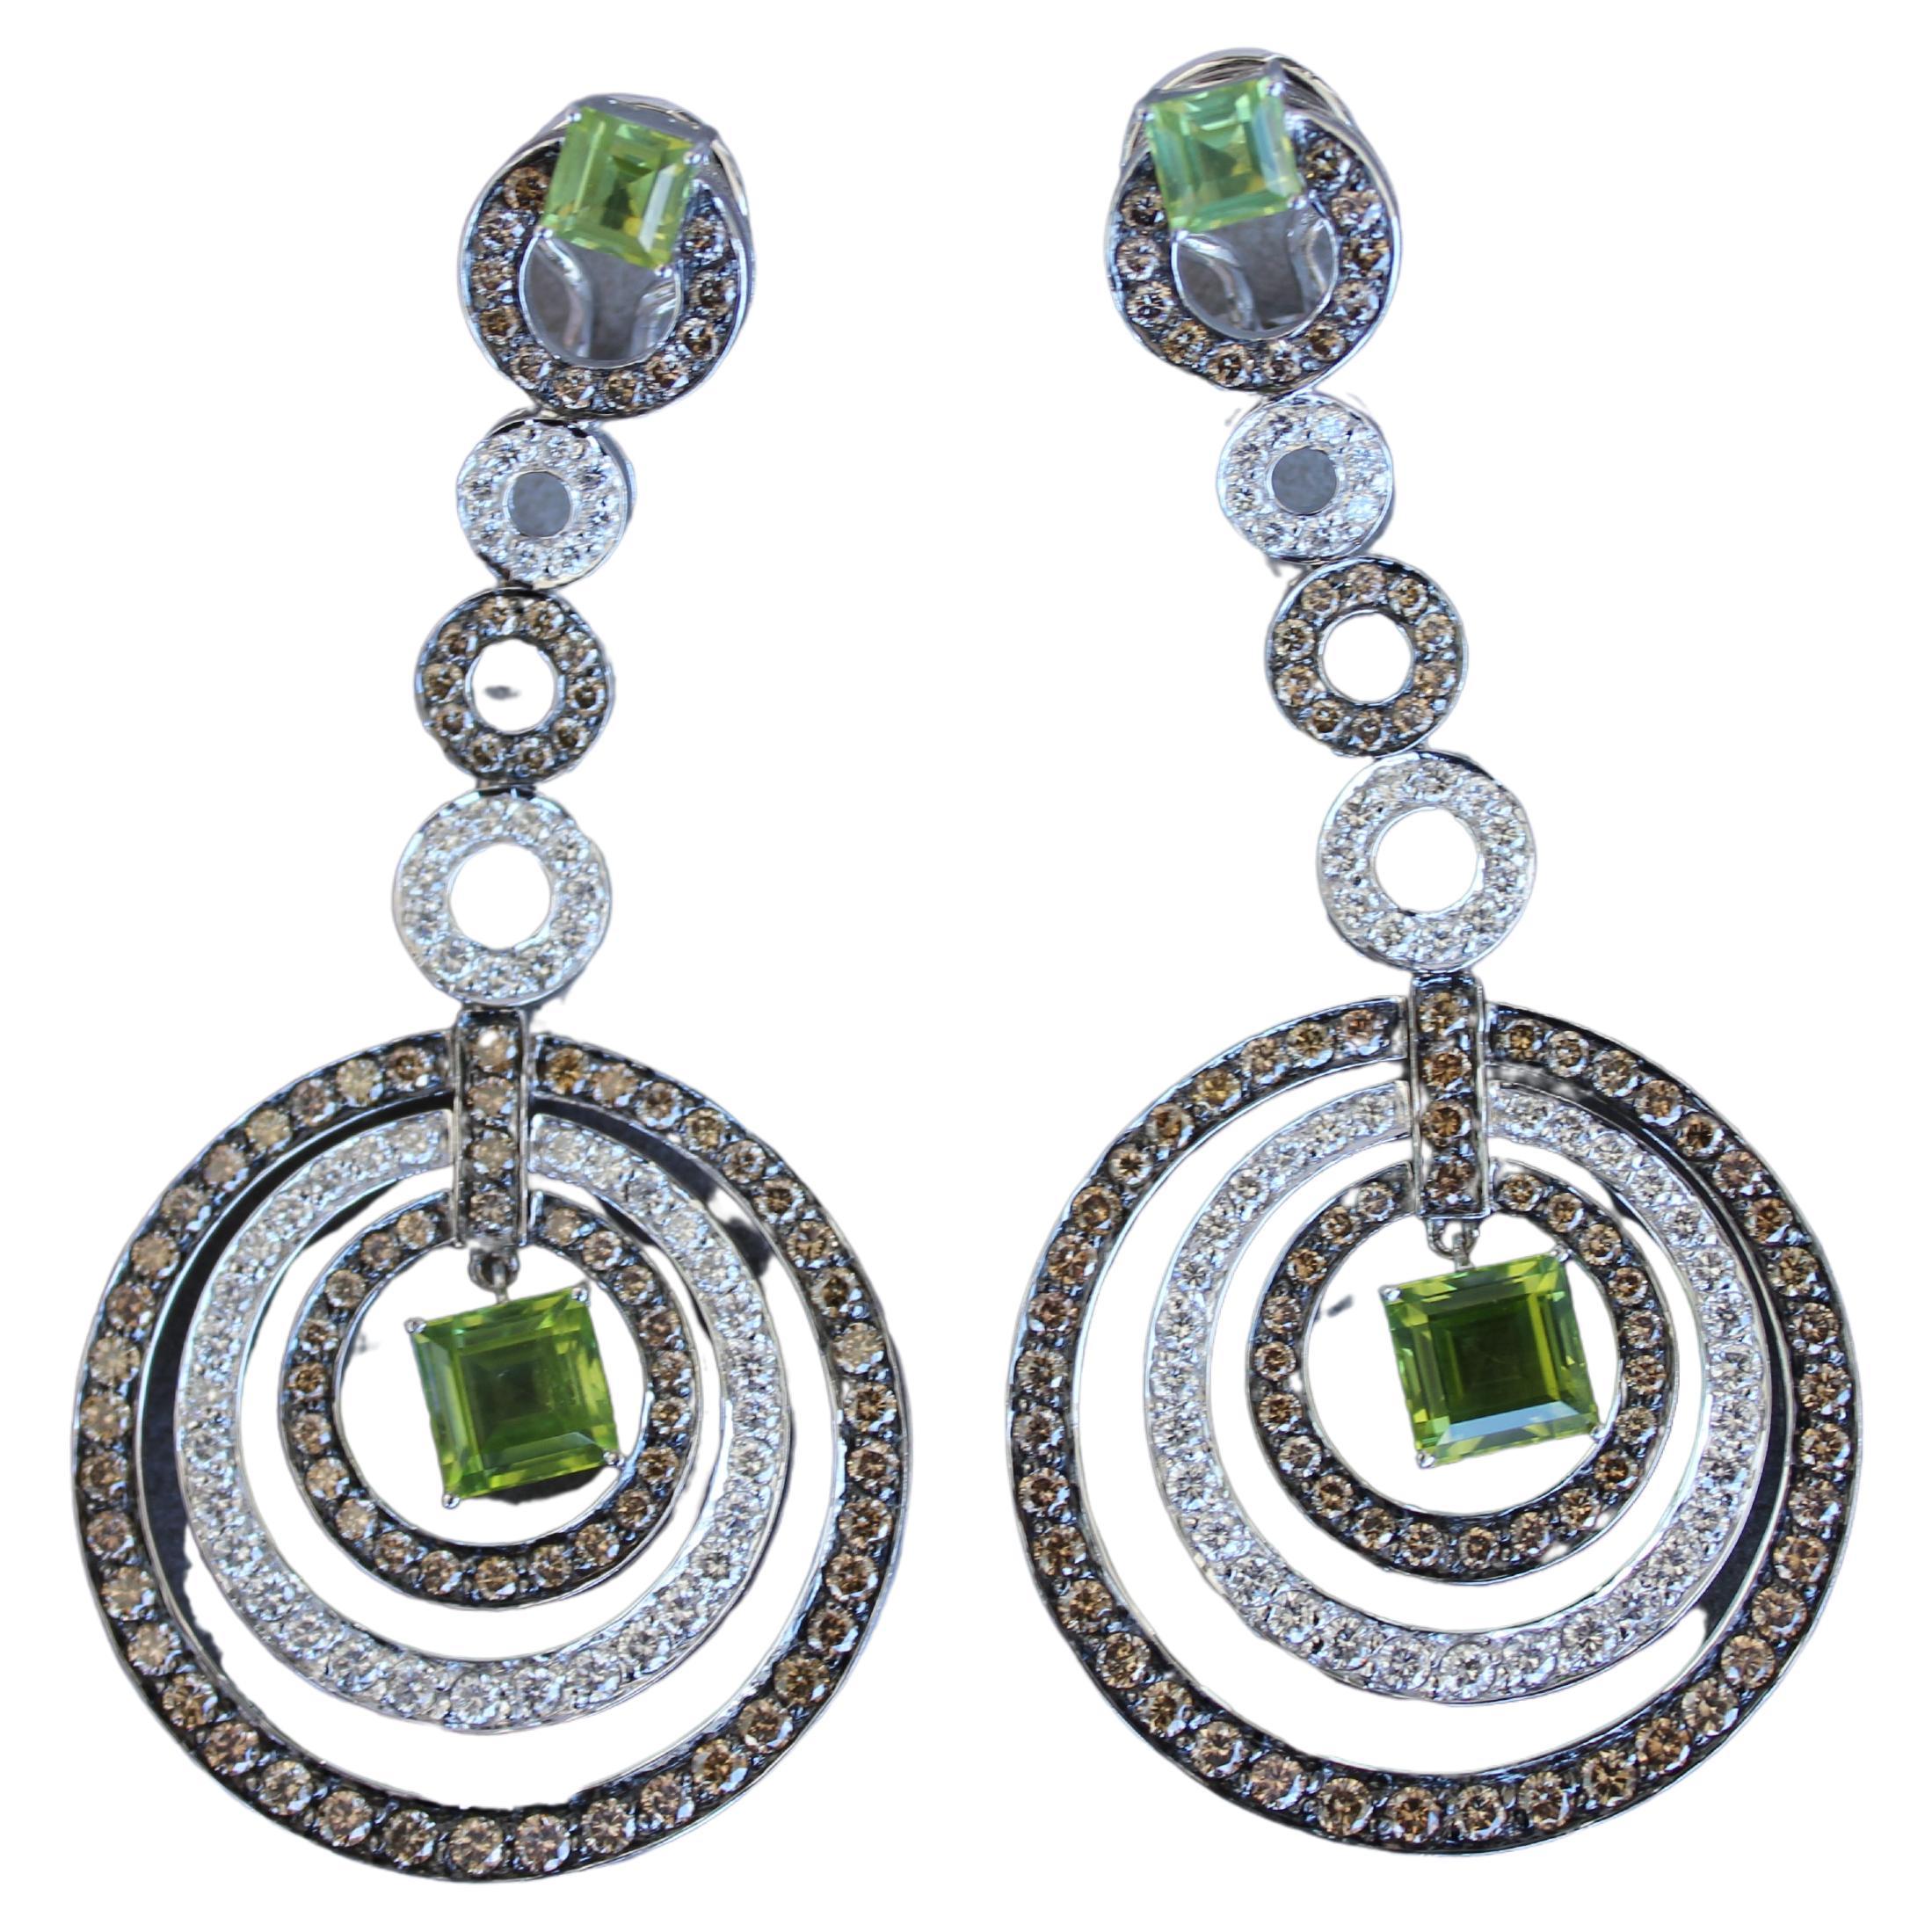 Green Peridot Faceted Square Shape White & Brown Diamond 18K White & Black Gold Earrings
5 CTW Natural Green Peridot 
Square Shape, Faceted Cut 
6.5 ctw of Brown & White Diamonds in Round Shapes & Brilliant Cuts
18K White & Black Gold 
Excellent,